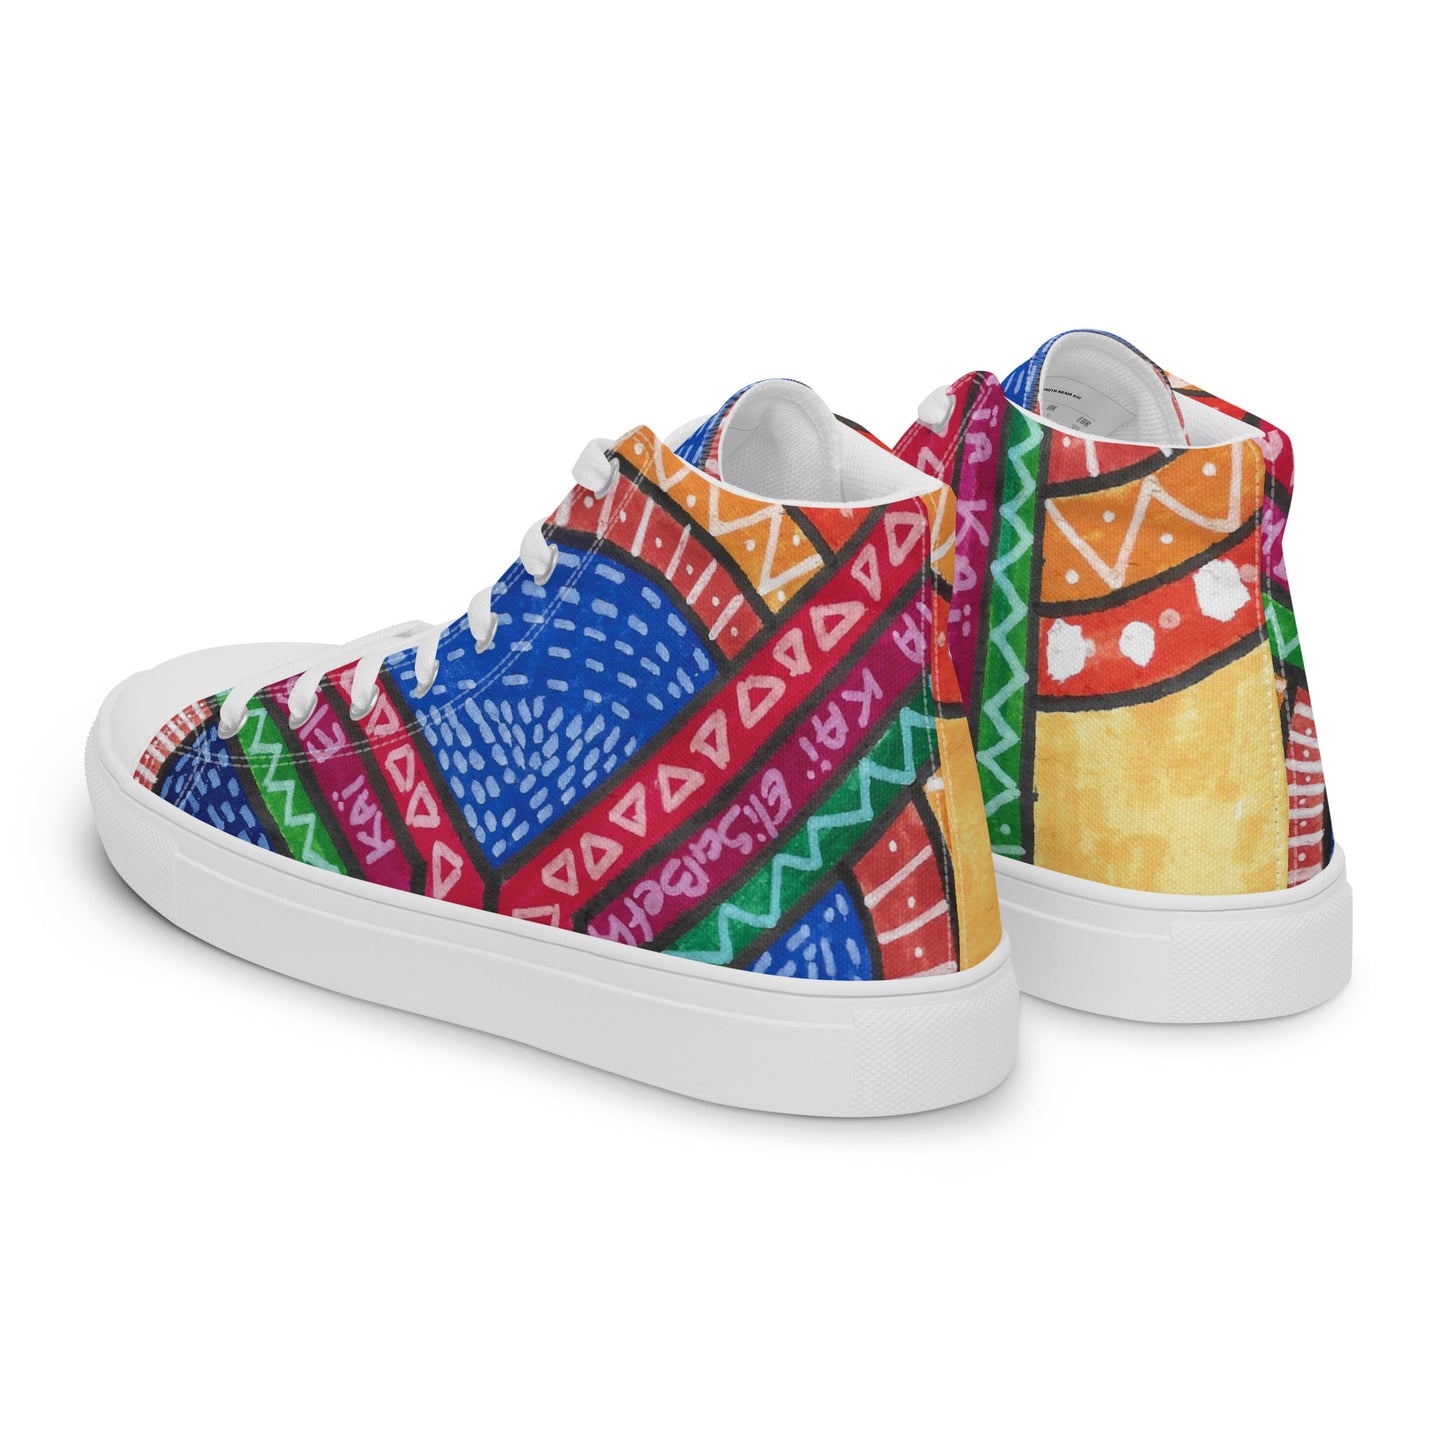 TIYI - Men's high-top canvas trainers